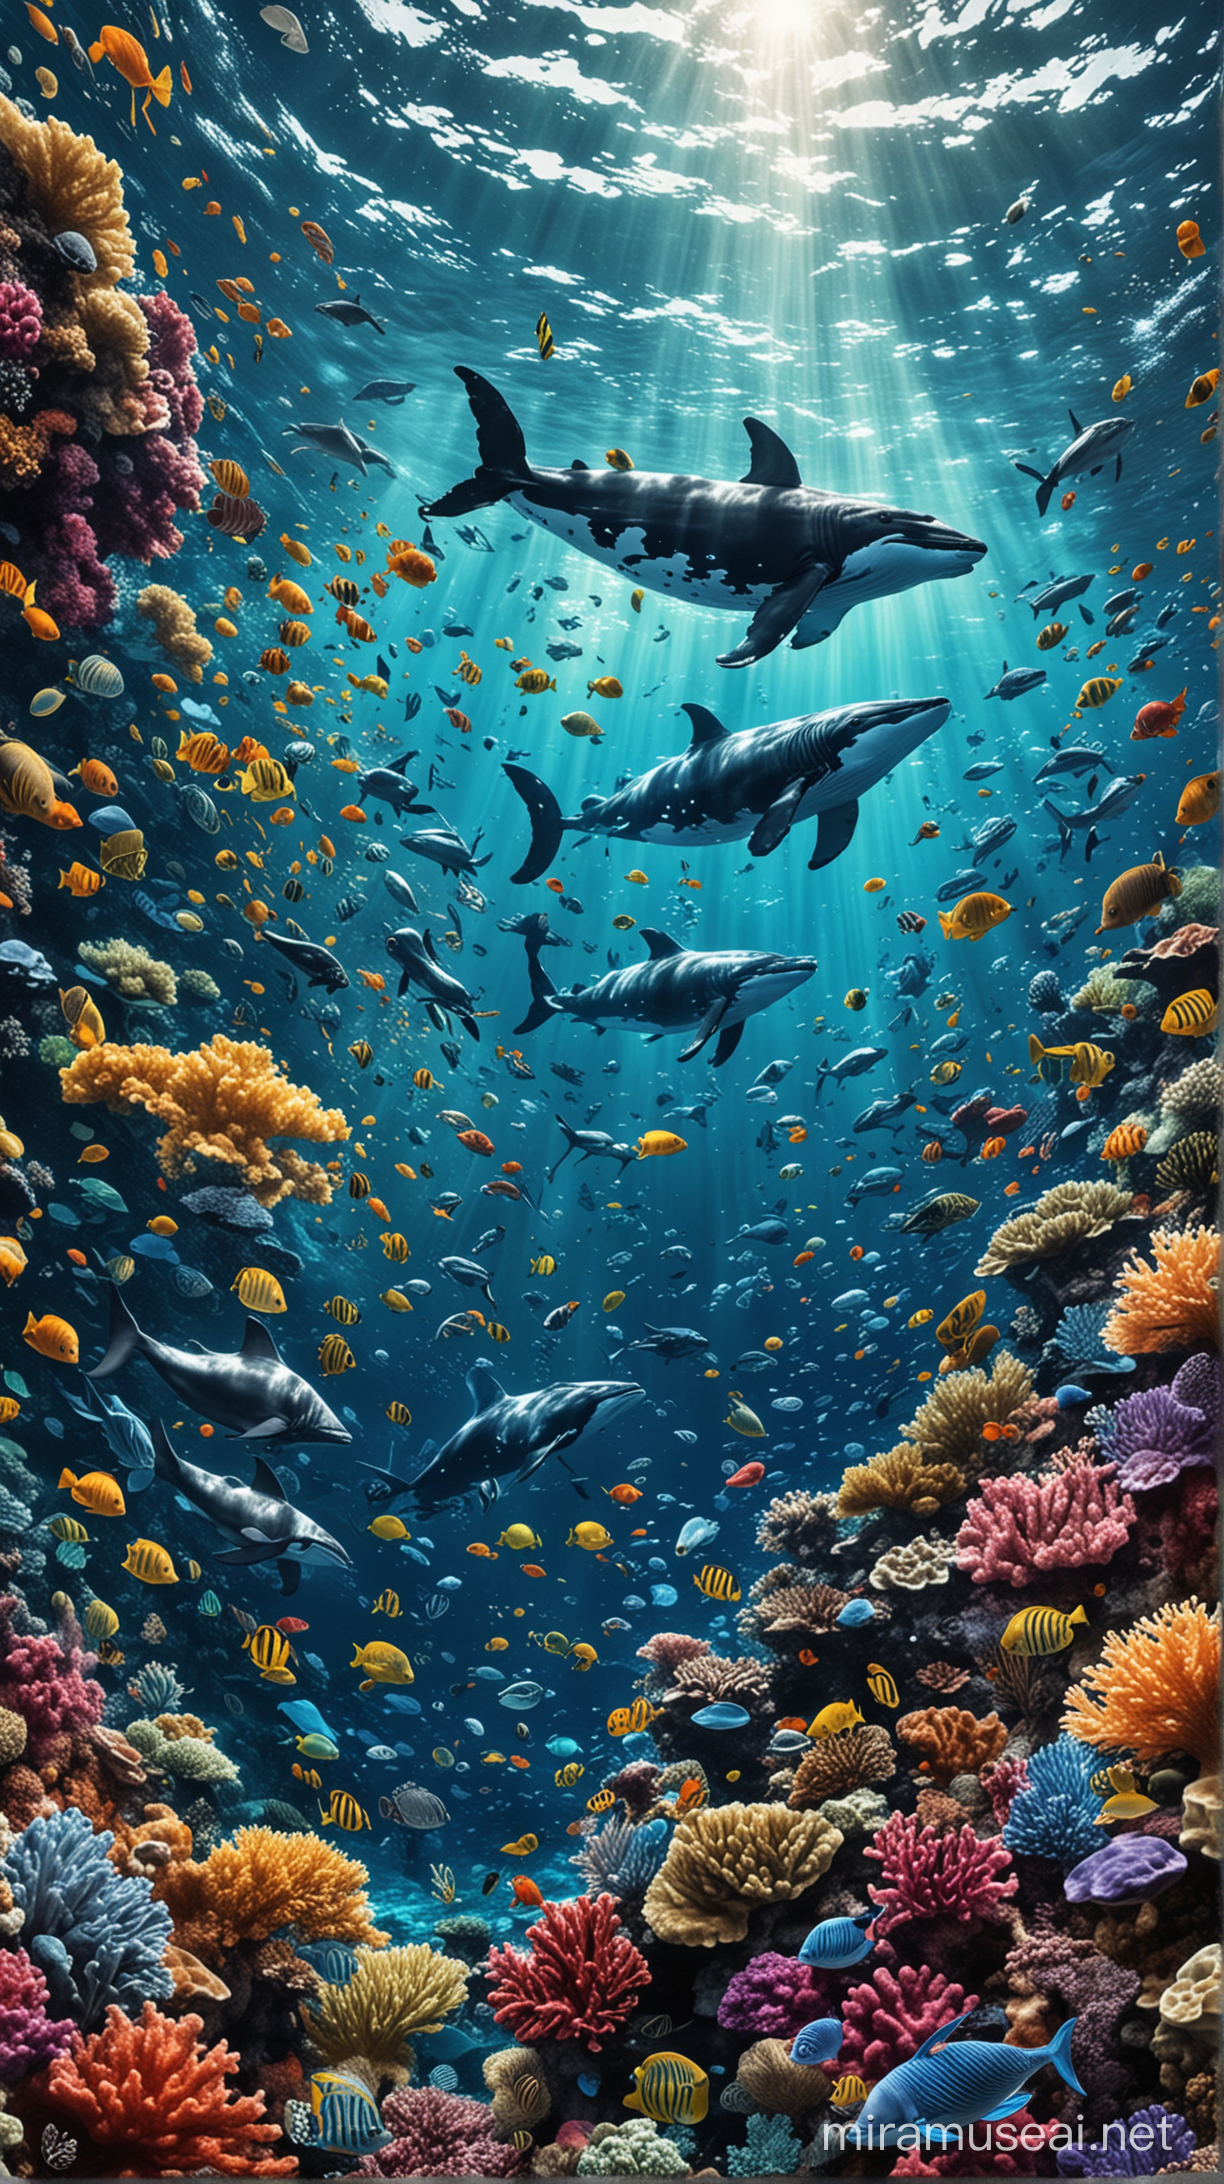 A dynamic collage showcasing the diverse marine life of the ocean, from colorful tropical fish to majestic whales, creating a mesmerizing visual feast for the eyes.